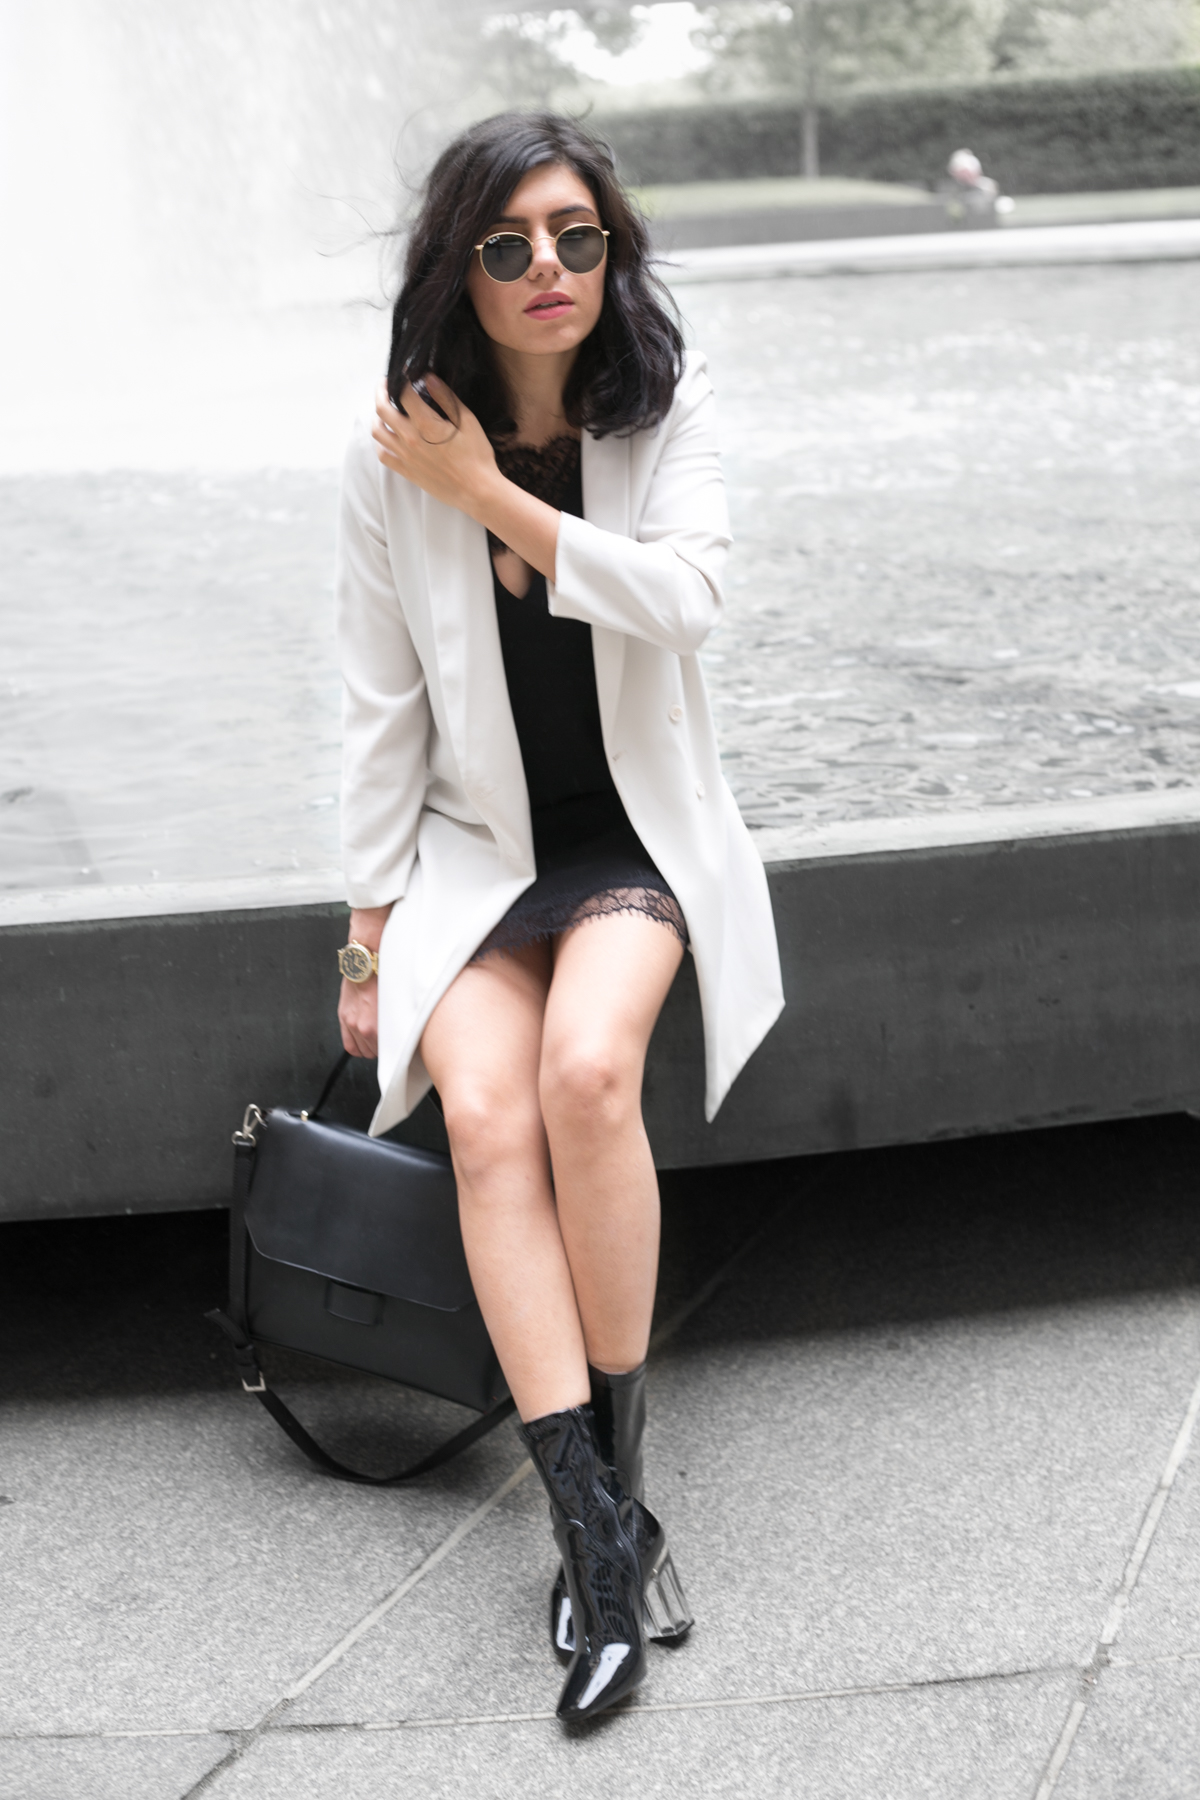 Long ivory blazer with black slip dress - outfit